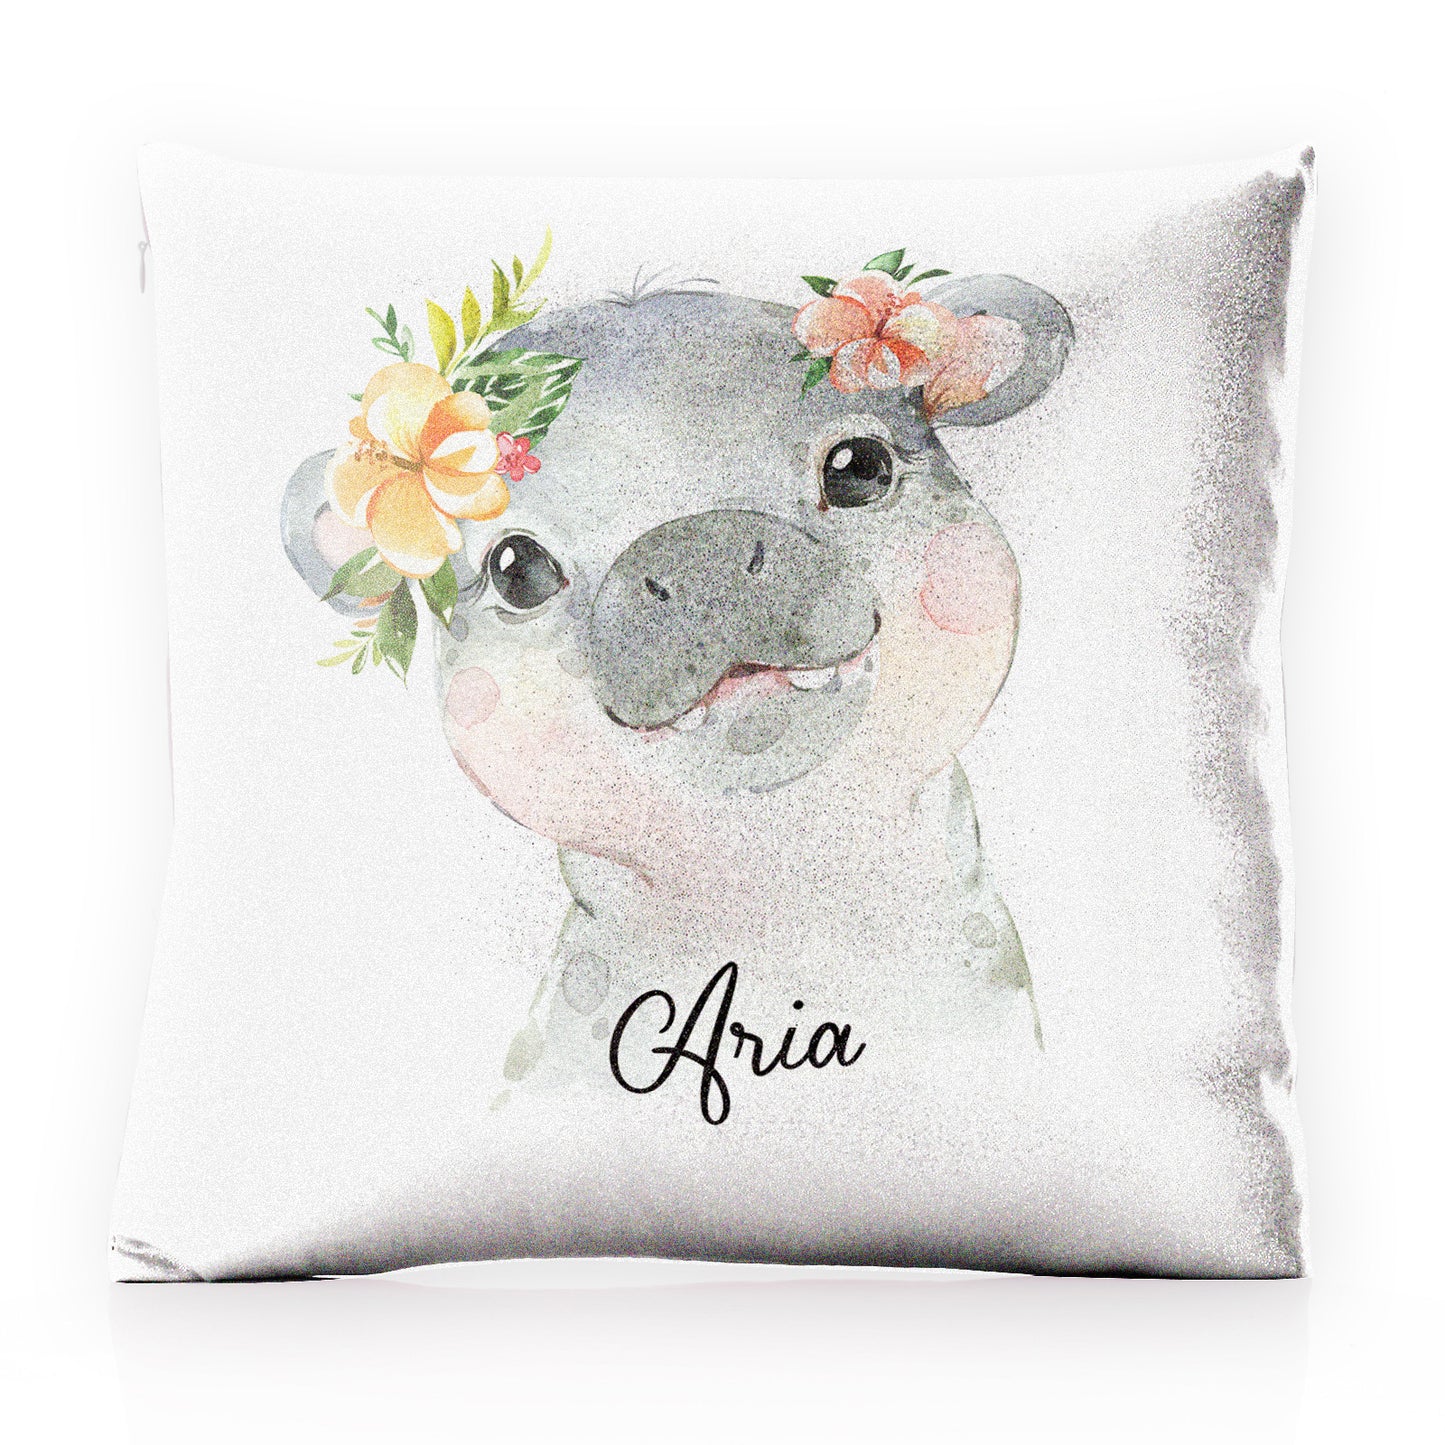 Personalised Glitter Cushion with Hippo Peach Flowers and Cute Text